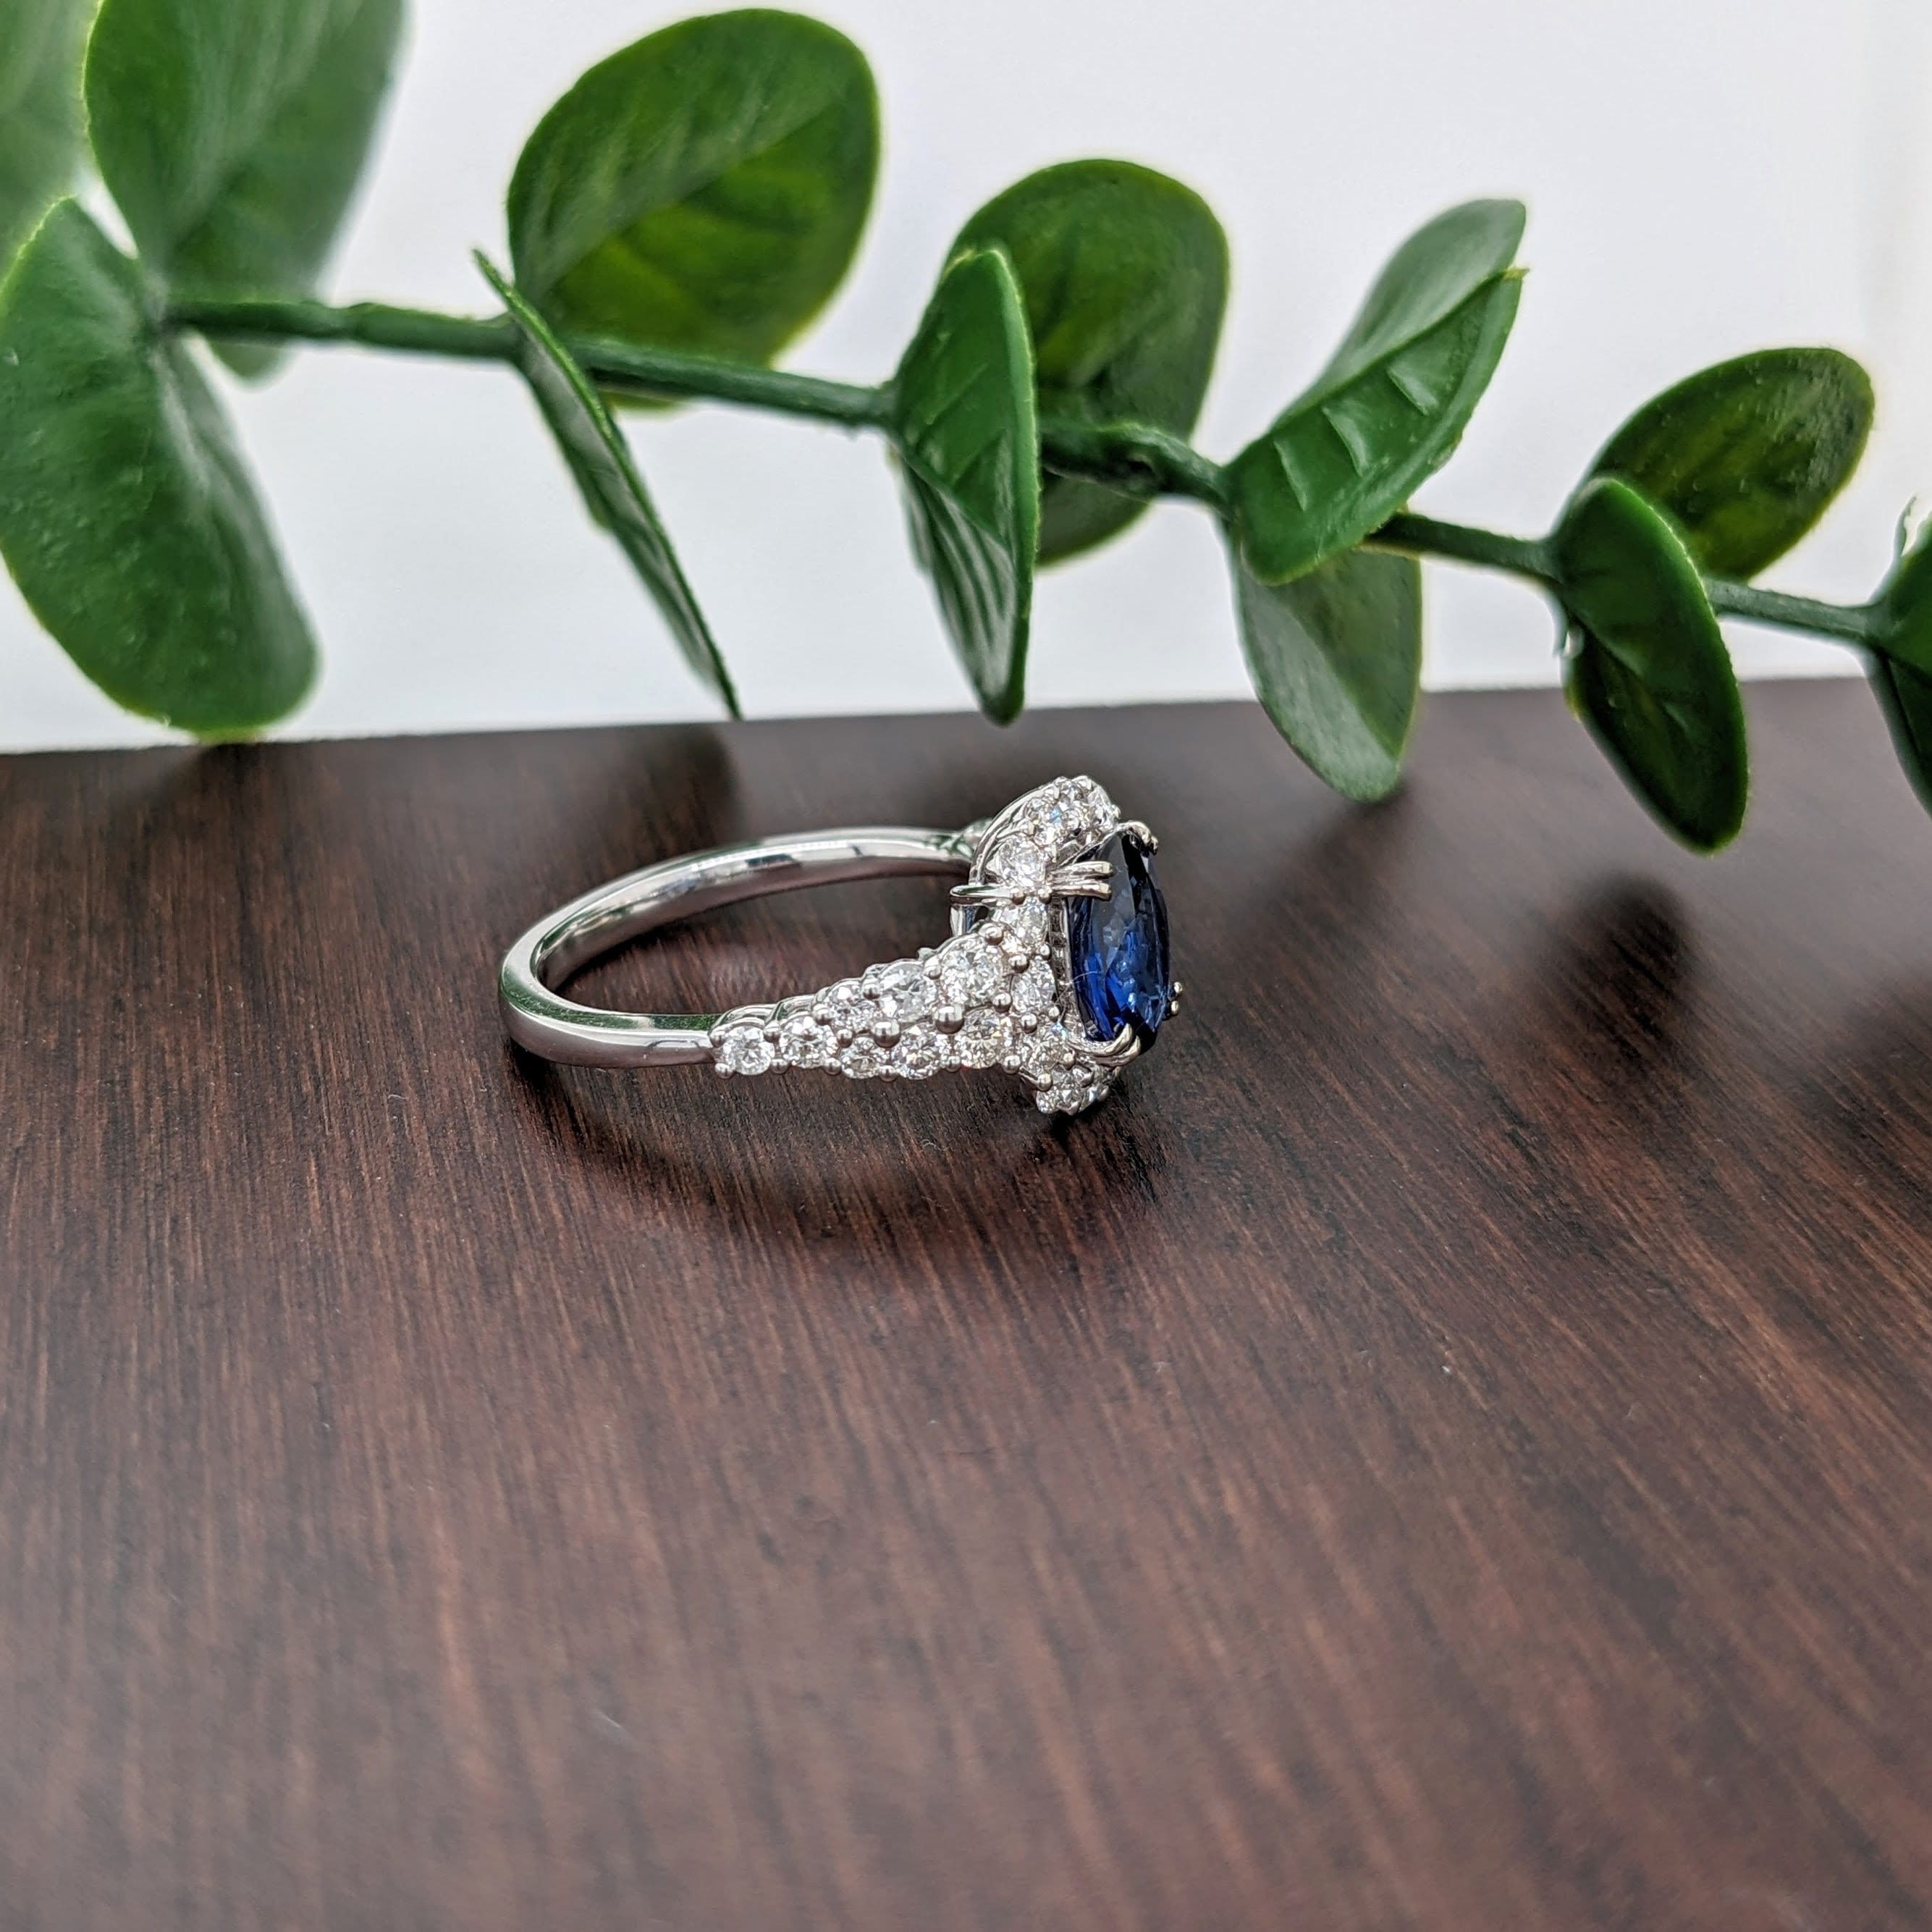 Pretty Oval Sapphire Ring w Natural Diamond Halo in Solid 14k White Gold | Blue Gemstone | Oval 7x5mm | Customizable | September Birthstone